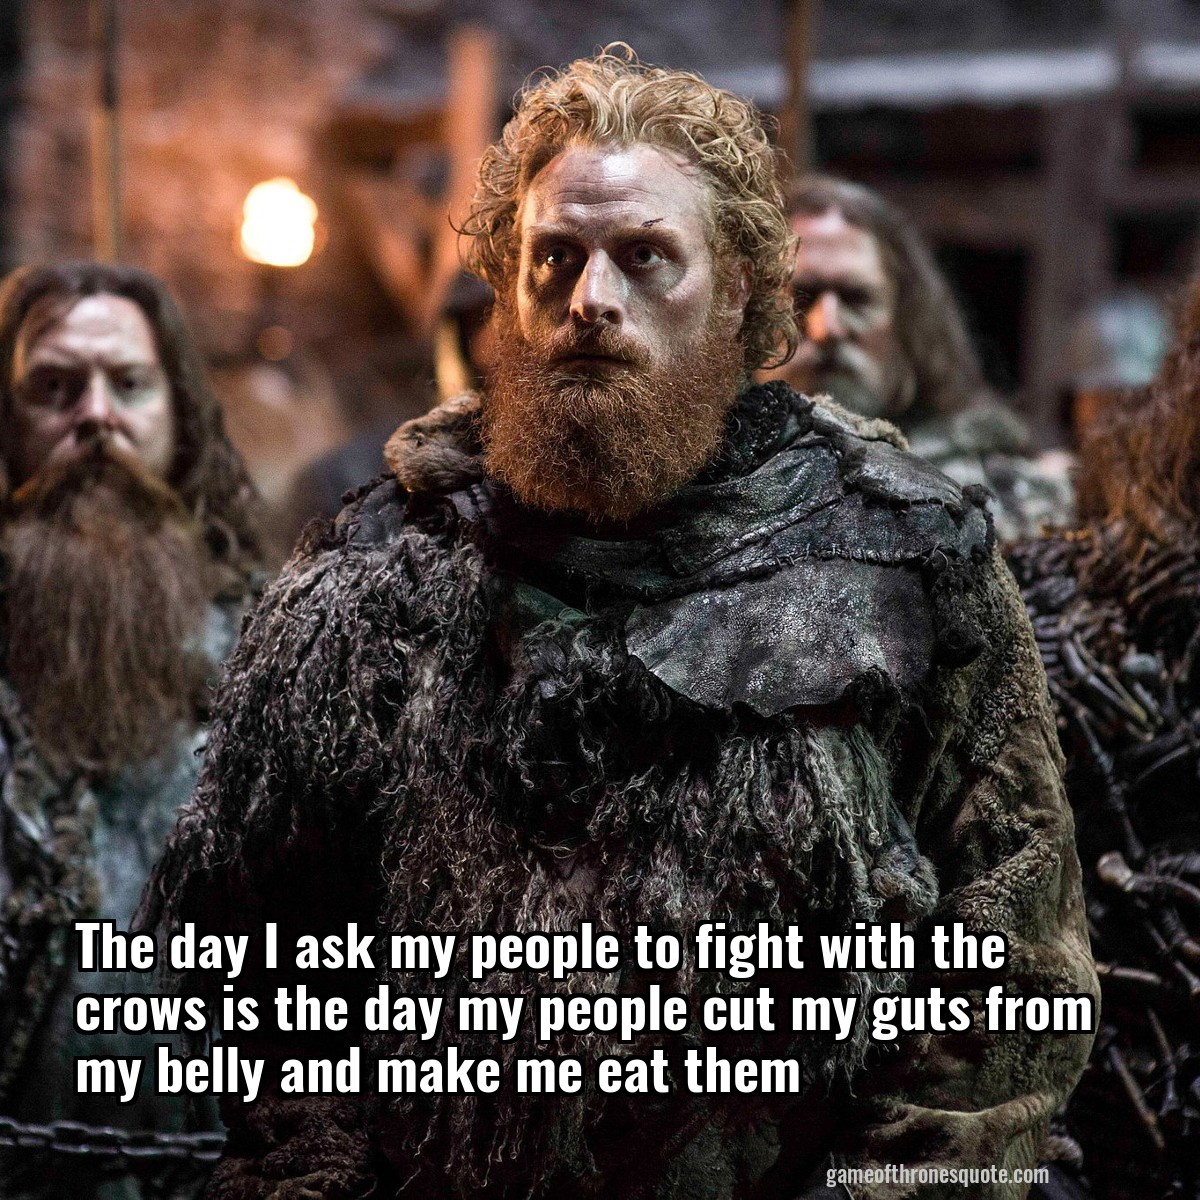 The day I ask my people to fight with the crows is the day my people cut my guts from my belly and make me eat them